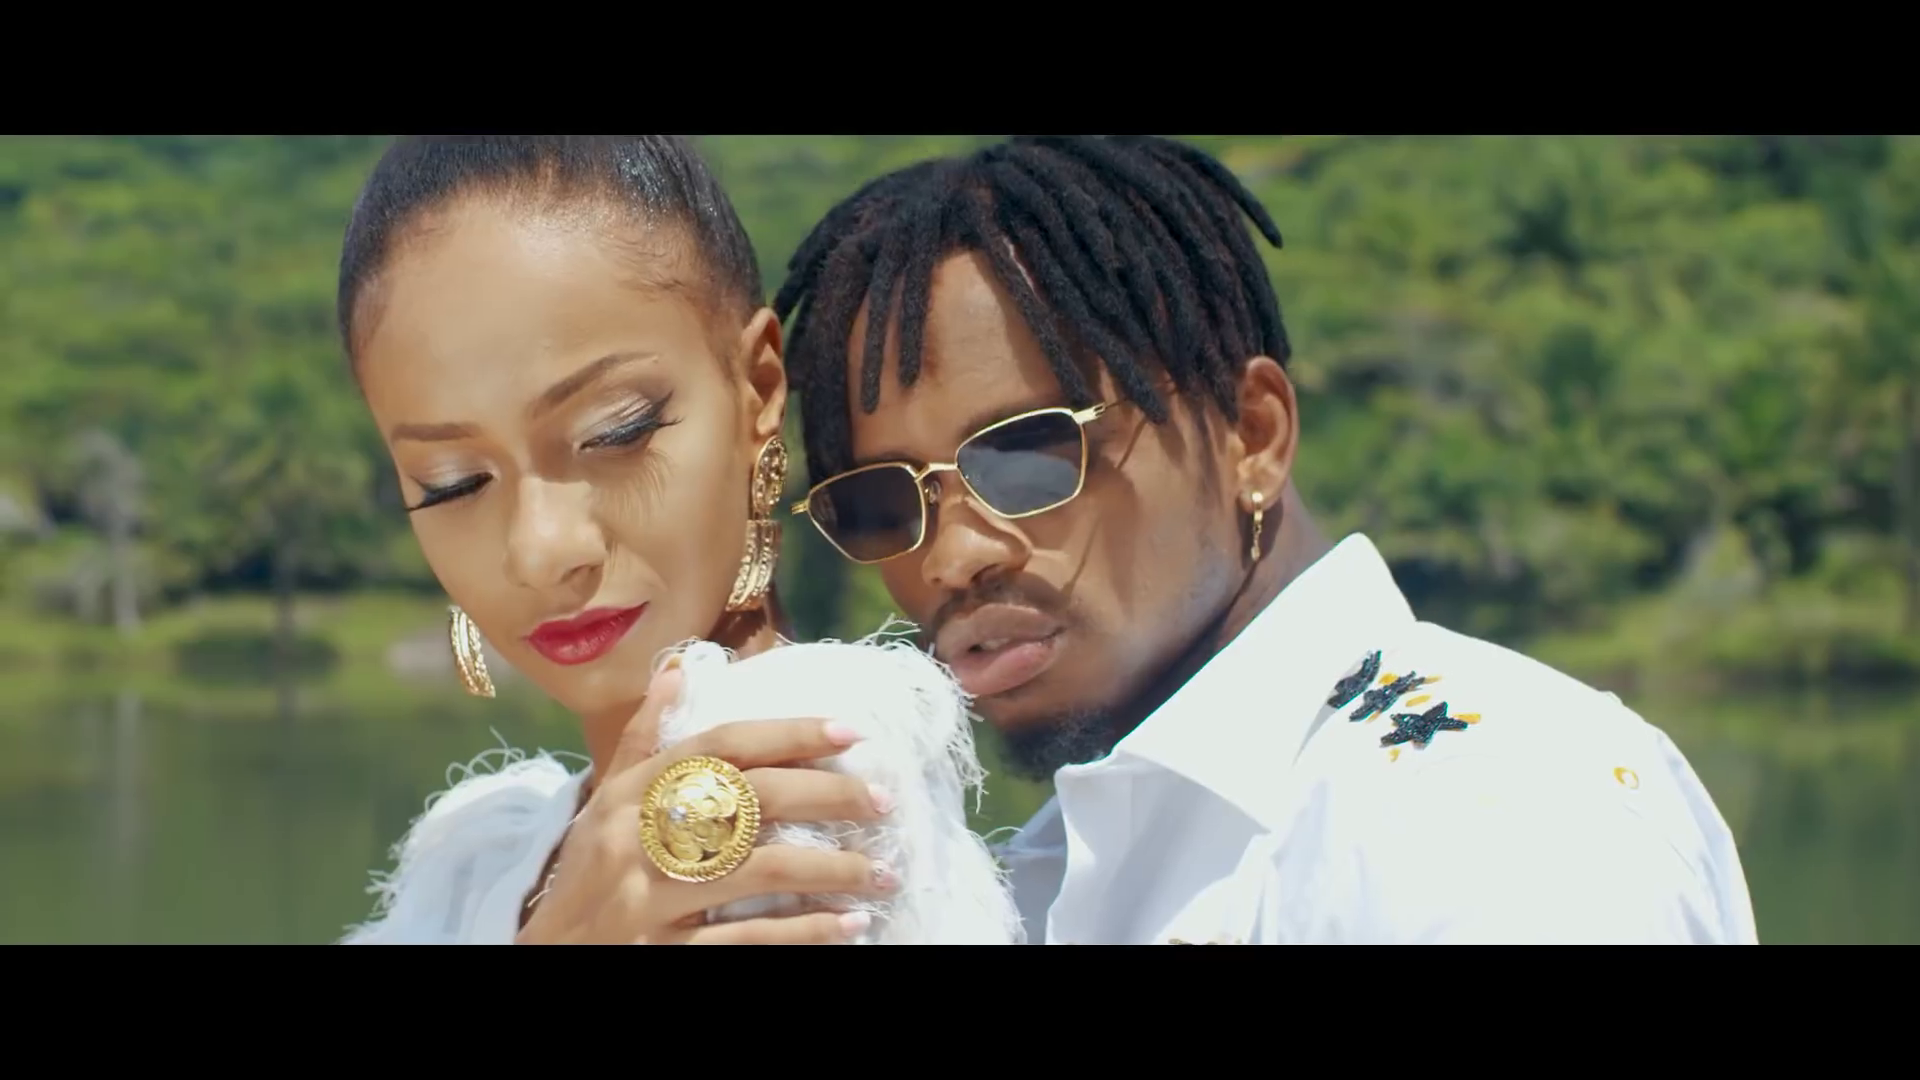 New Banger, ‘The One’ by Diamond Platinumz is all about love